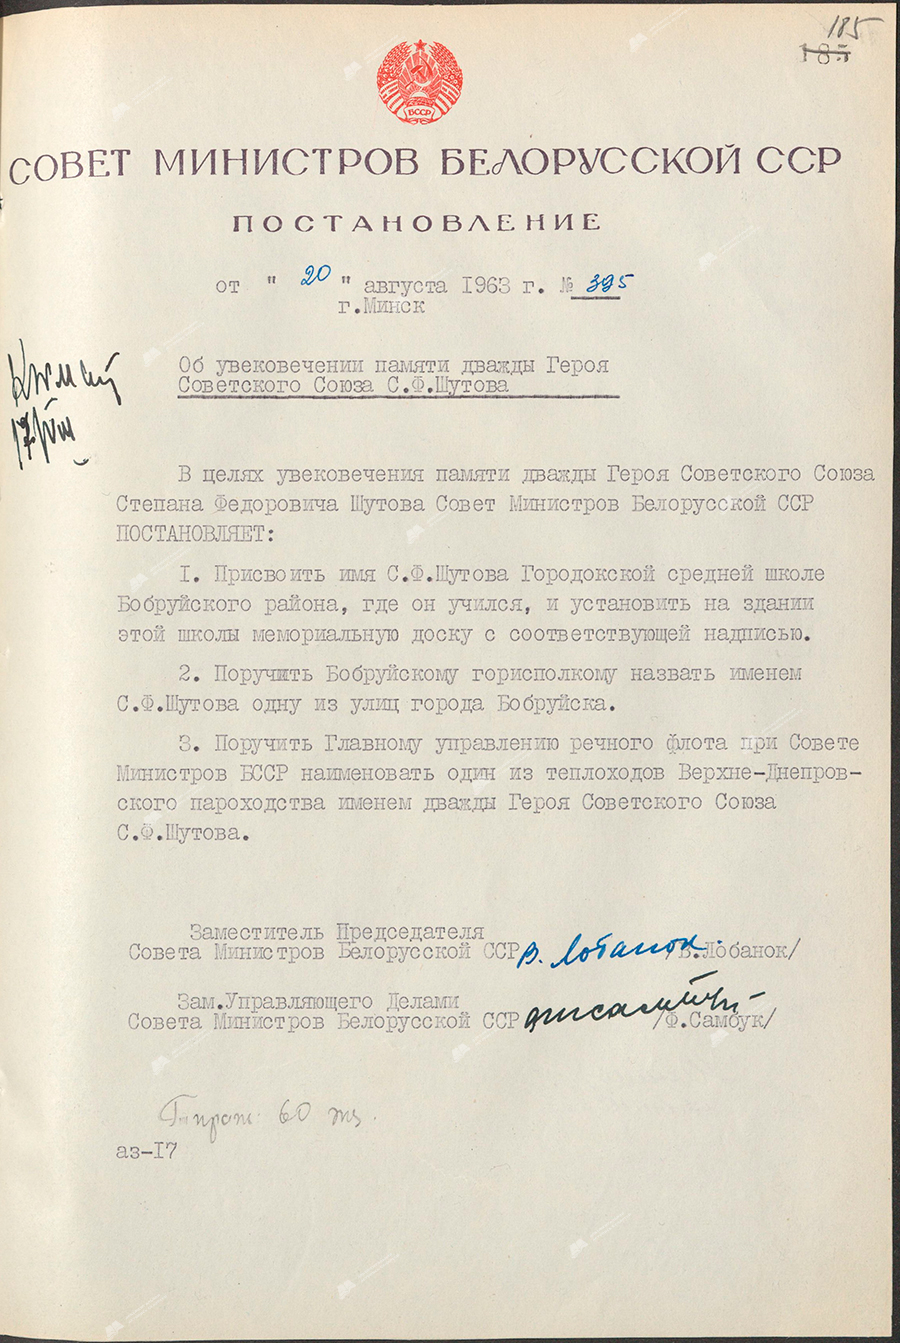 Resolution No. 395 of the Council of Ministers of the BSSR «On perpetuating the memory of twice Hero of the Soviet Union S.F. Shutova»-с. 0